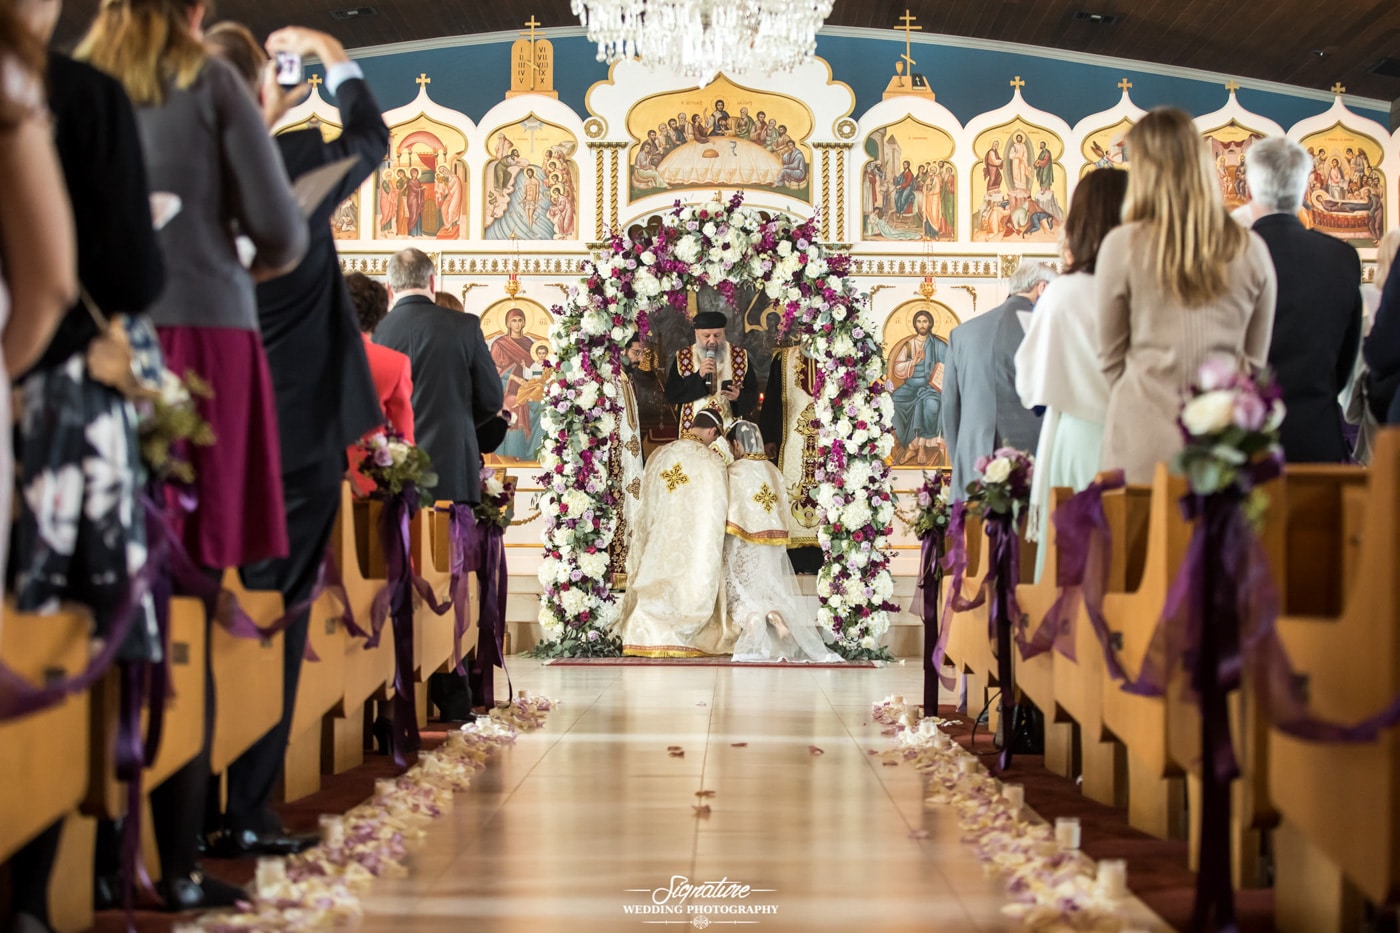 Bride and groom knelt at church alter during ceremony